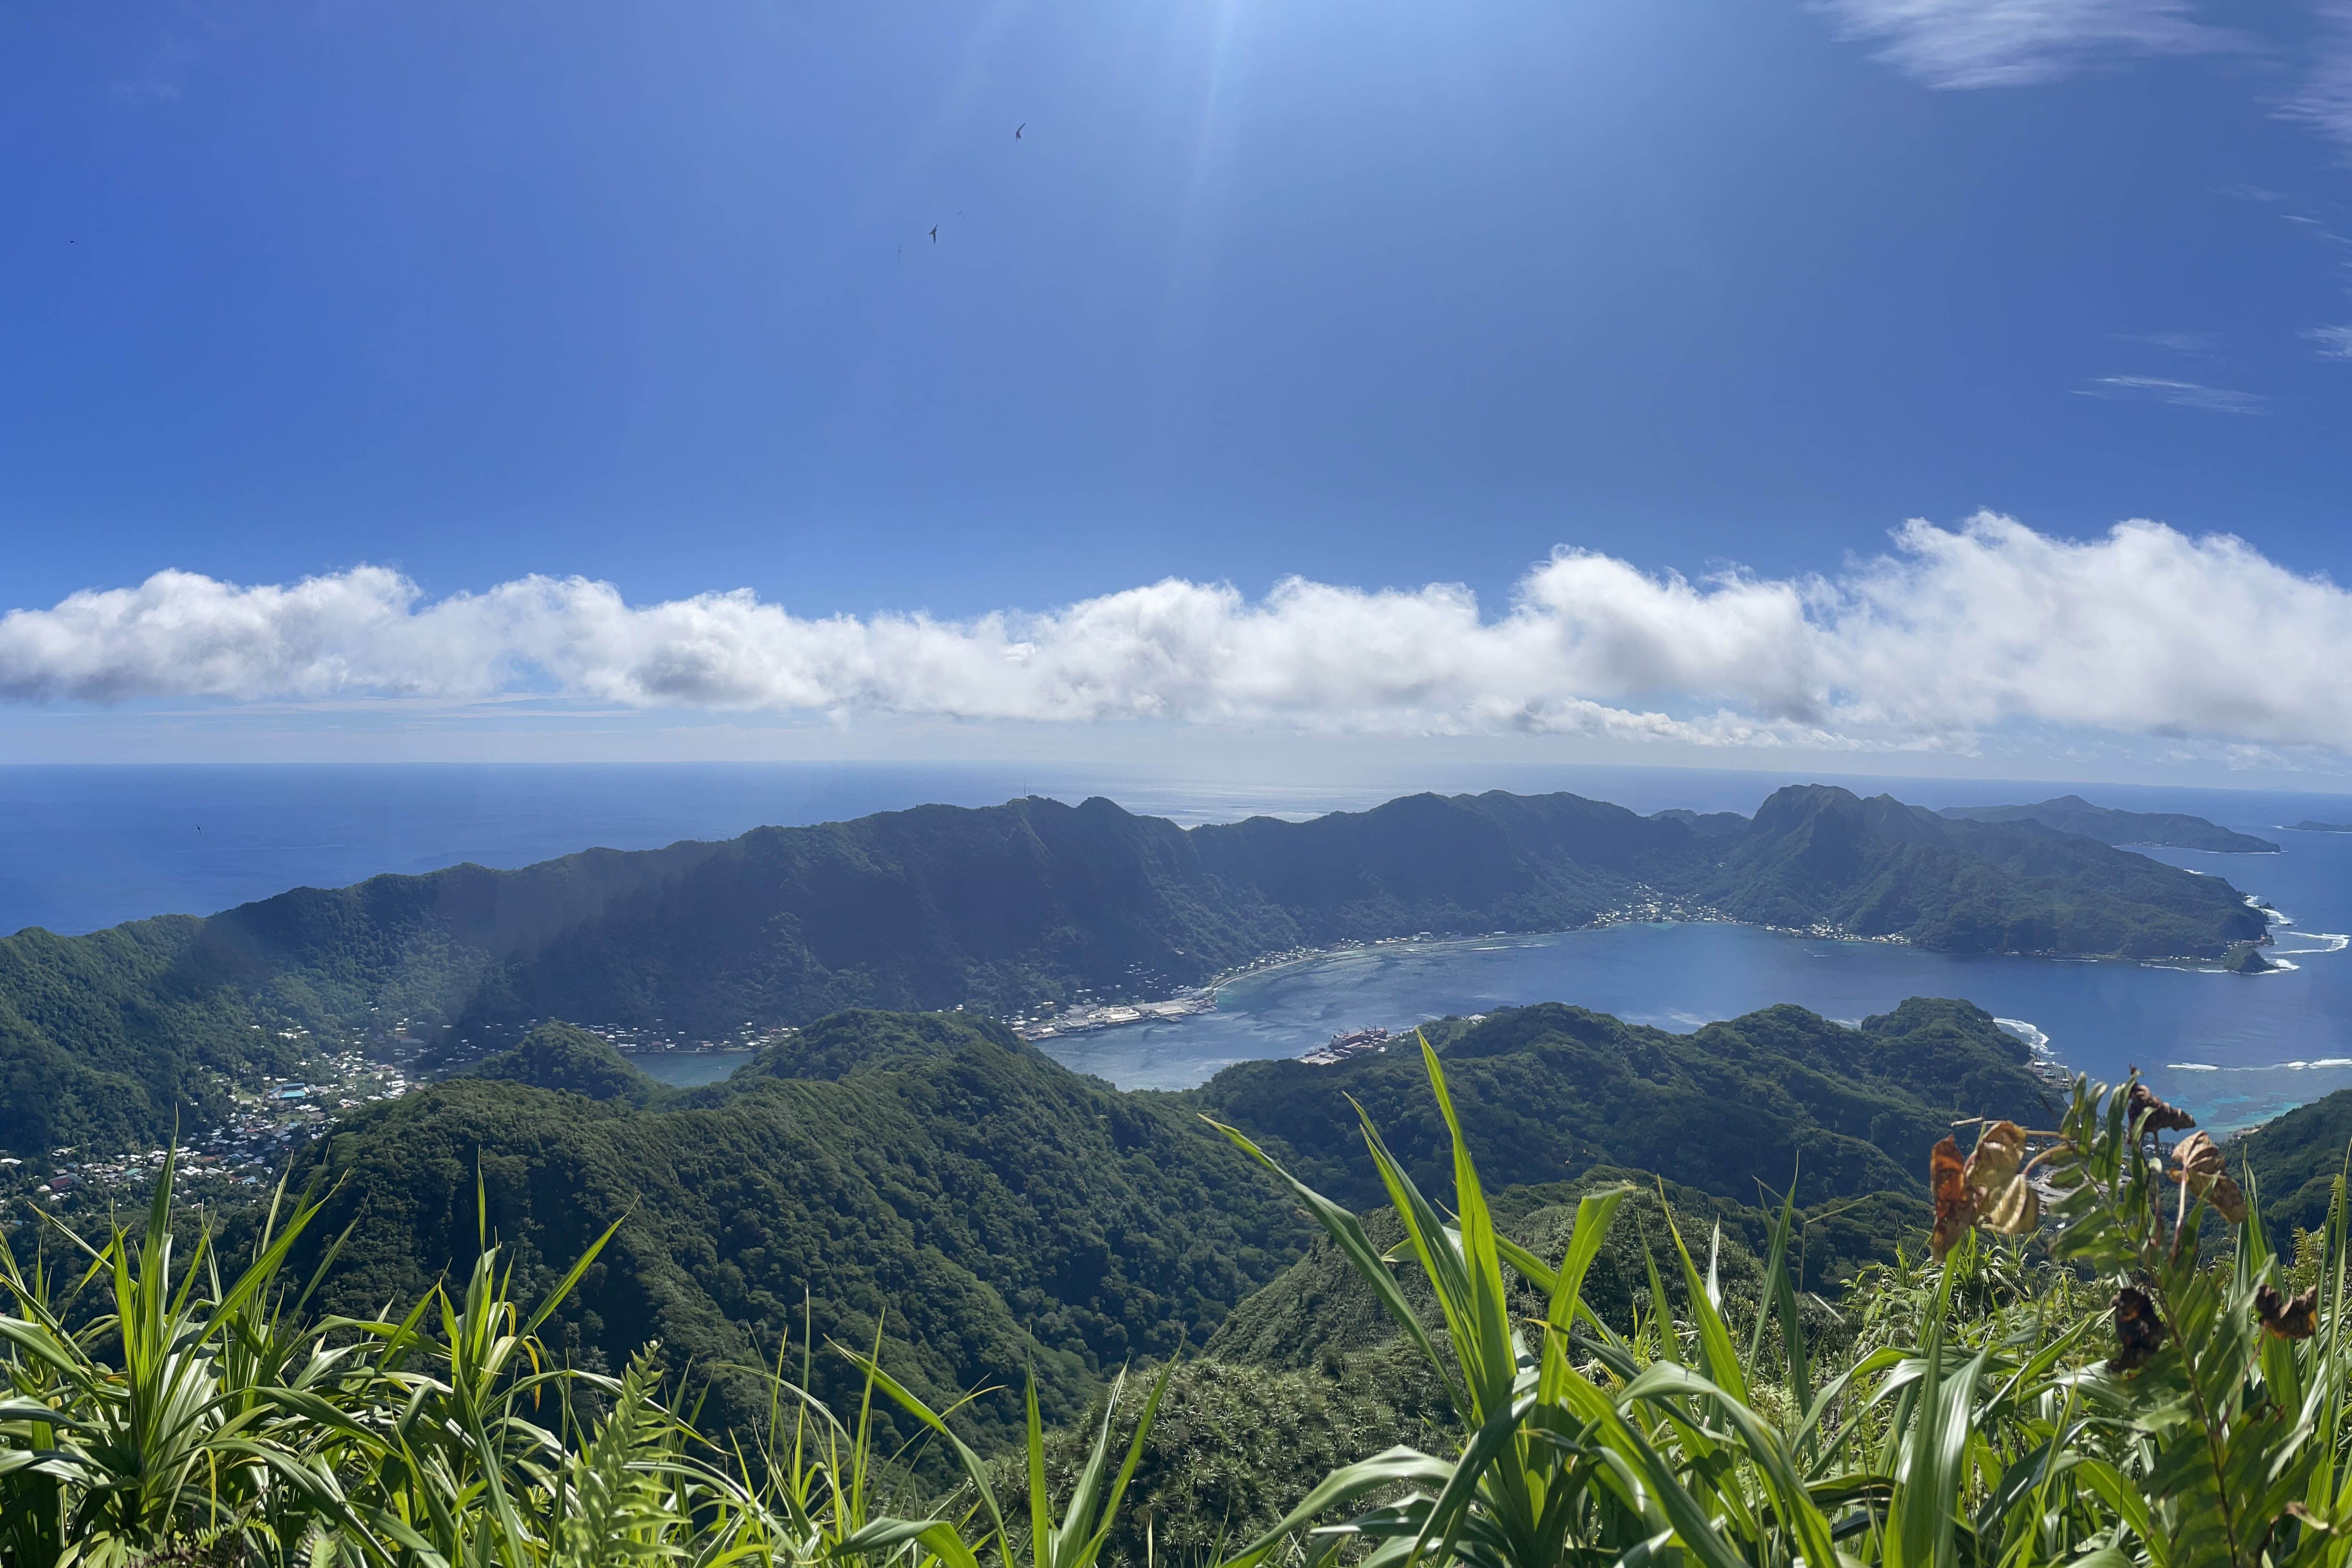 A photo taken from a nearby mountain showing Pago Pago Harbour in American Samoa with Pacific Ocean surrounding it and the island.